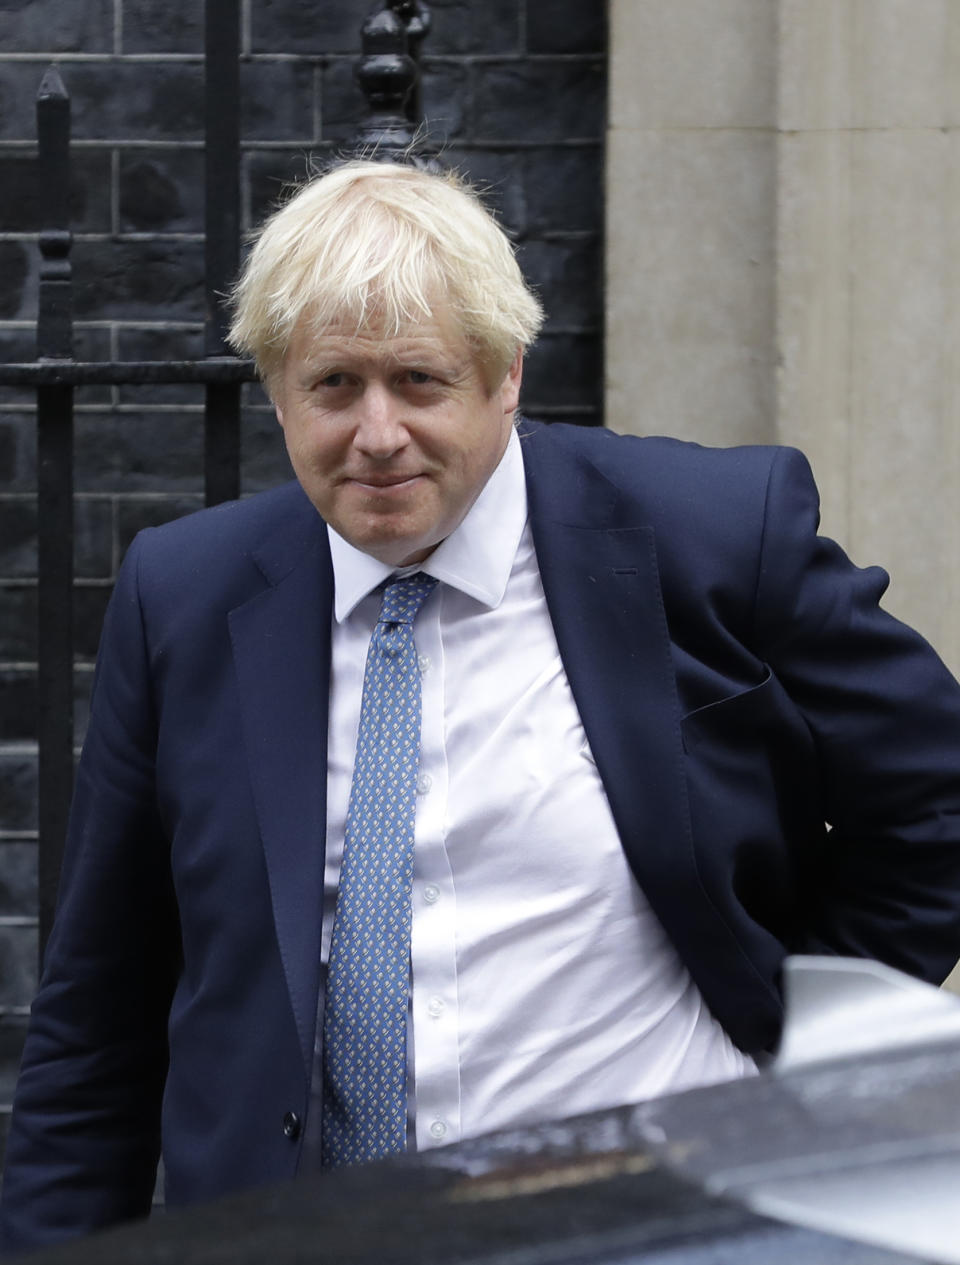 Britain's Prime Minister Boris Johnson leaves 10 Downing Street in London, Thursday, Sept. 26, 2019. An unrepentant Prime Minister Boris Johnson brushed off cries of "Resign!" and dared his foes to try to topple him Wednesday at a raucous session of Parliament, a day after Britain's highest court ruled he acted illegally in suspending the body ahead of the Brexit deadline. (AP Photo/Kirsty Wigglesworth)